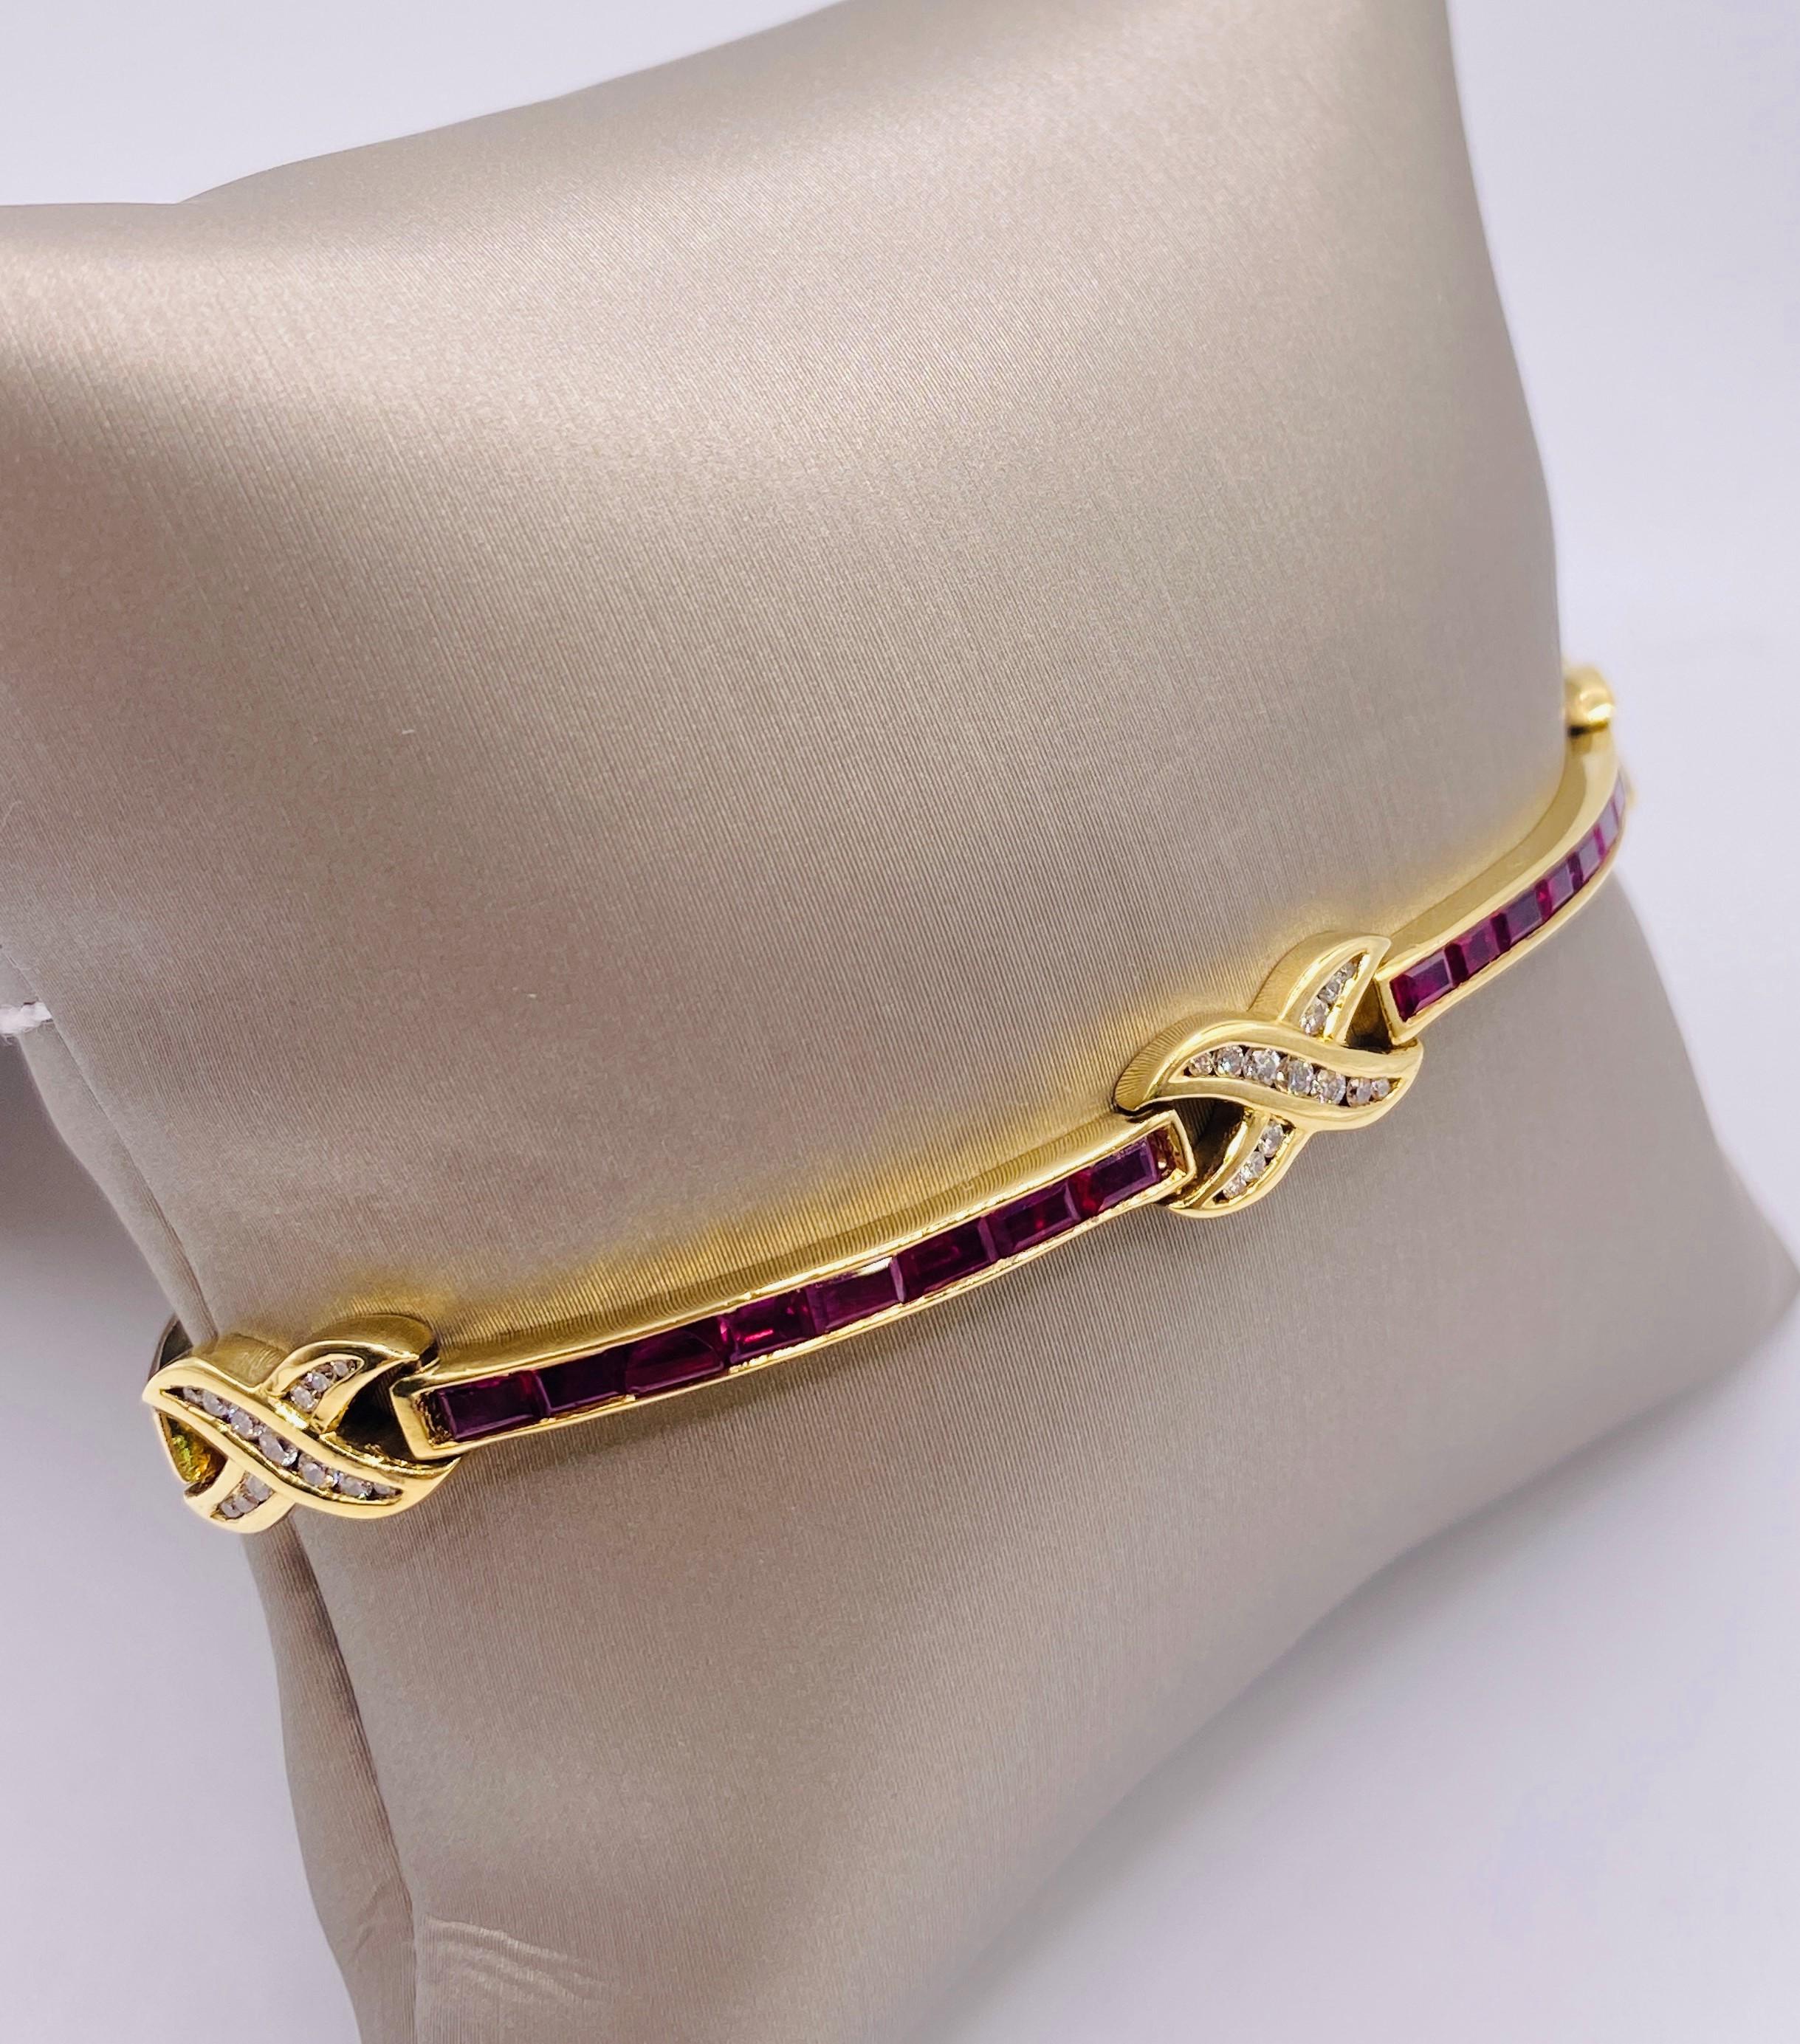 18k yellow gold 3.85 carat total weight channel-set baguette rubies and 0.50 carat total weight round brilliant cut diamond bracelet.10.8Dwt. 8